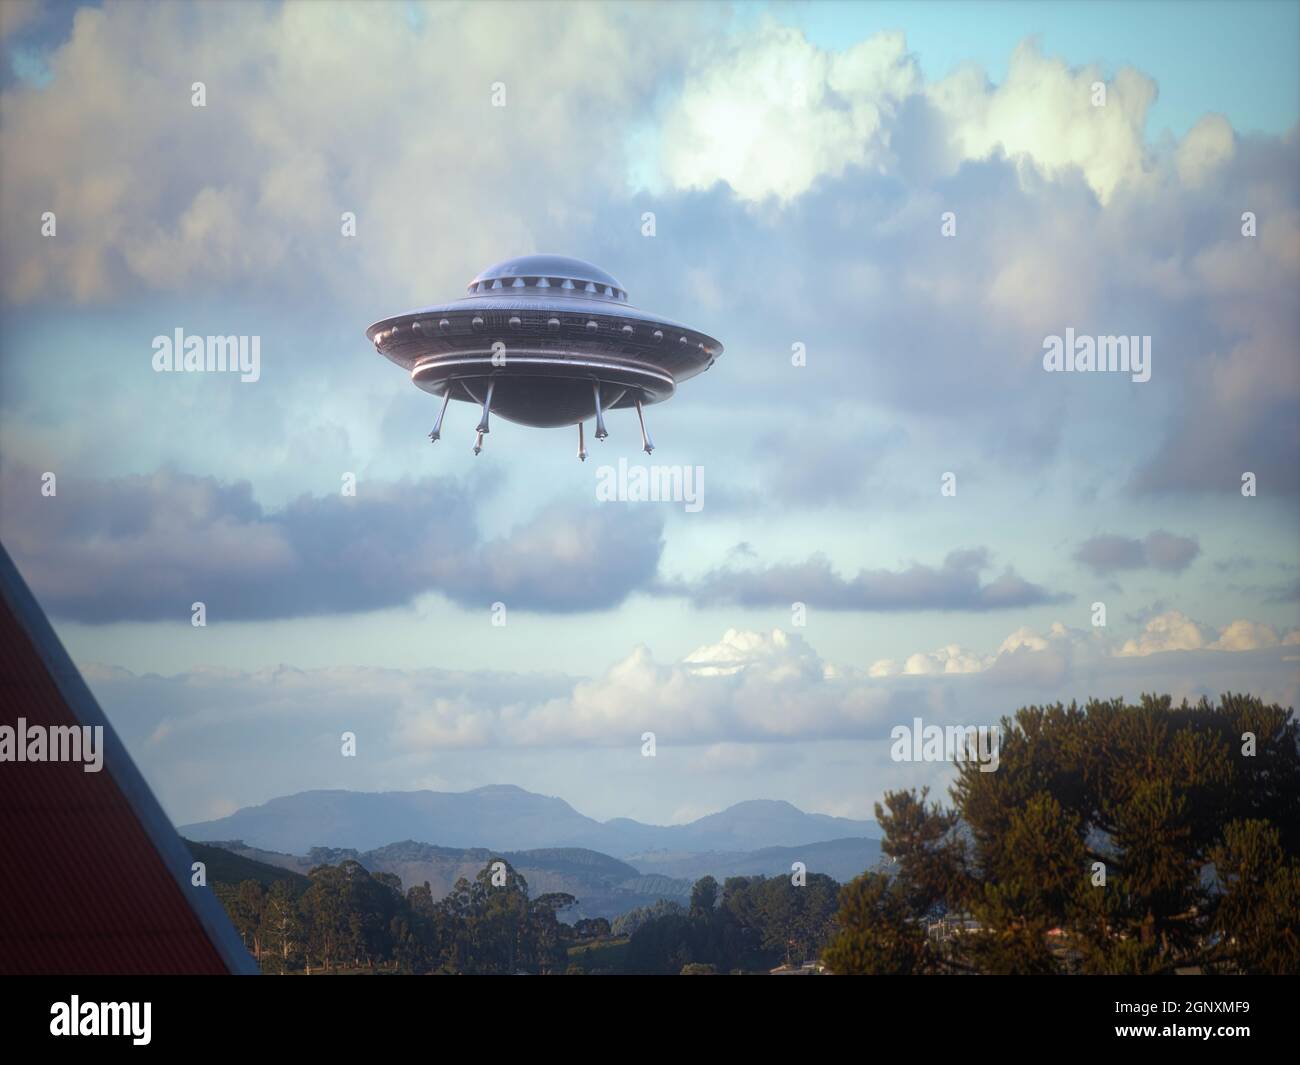 Unidentified flying object flying over the city. Alien spaceship in the shape of a disc made of metallic material. Clipping path included. Stock Photo